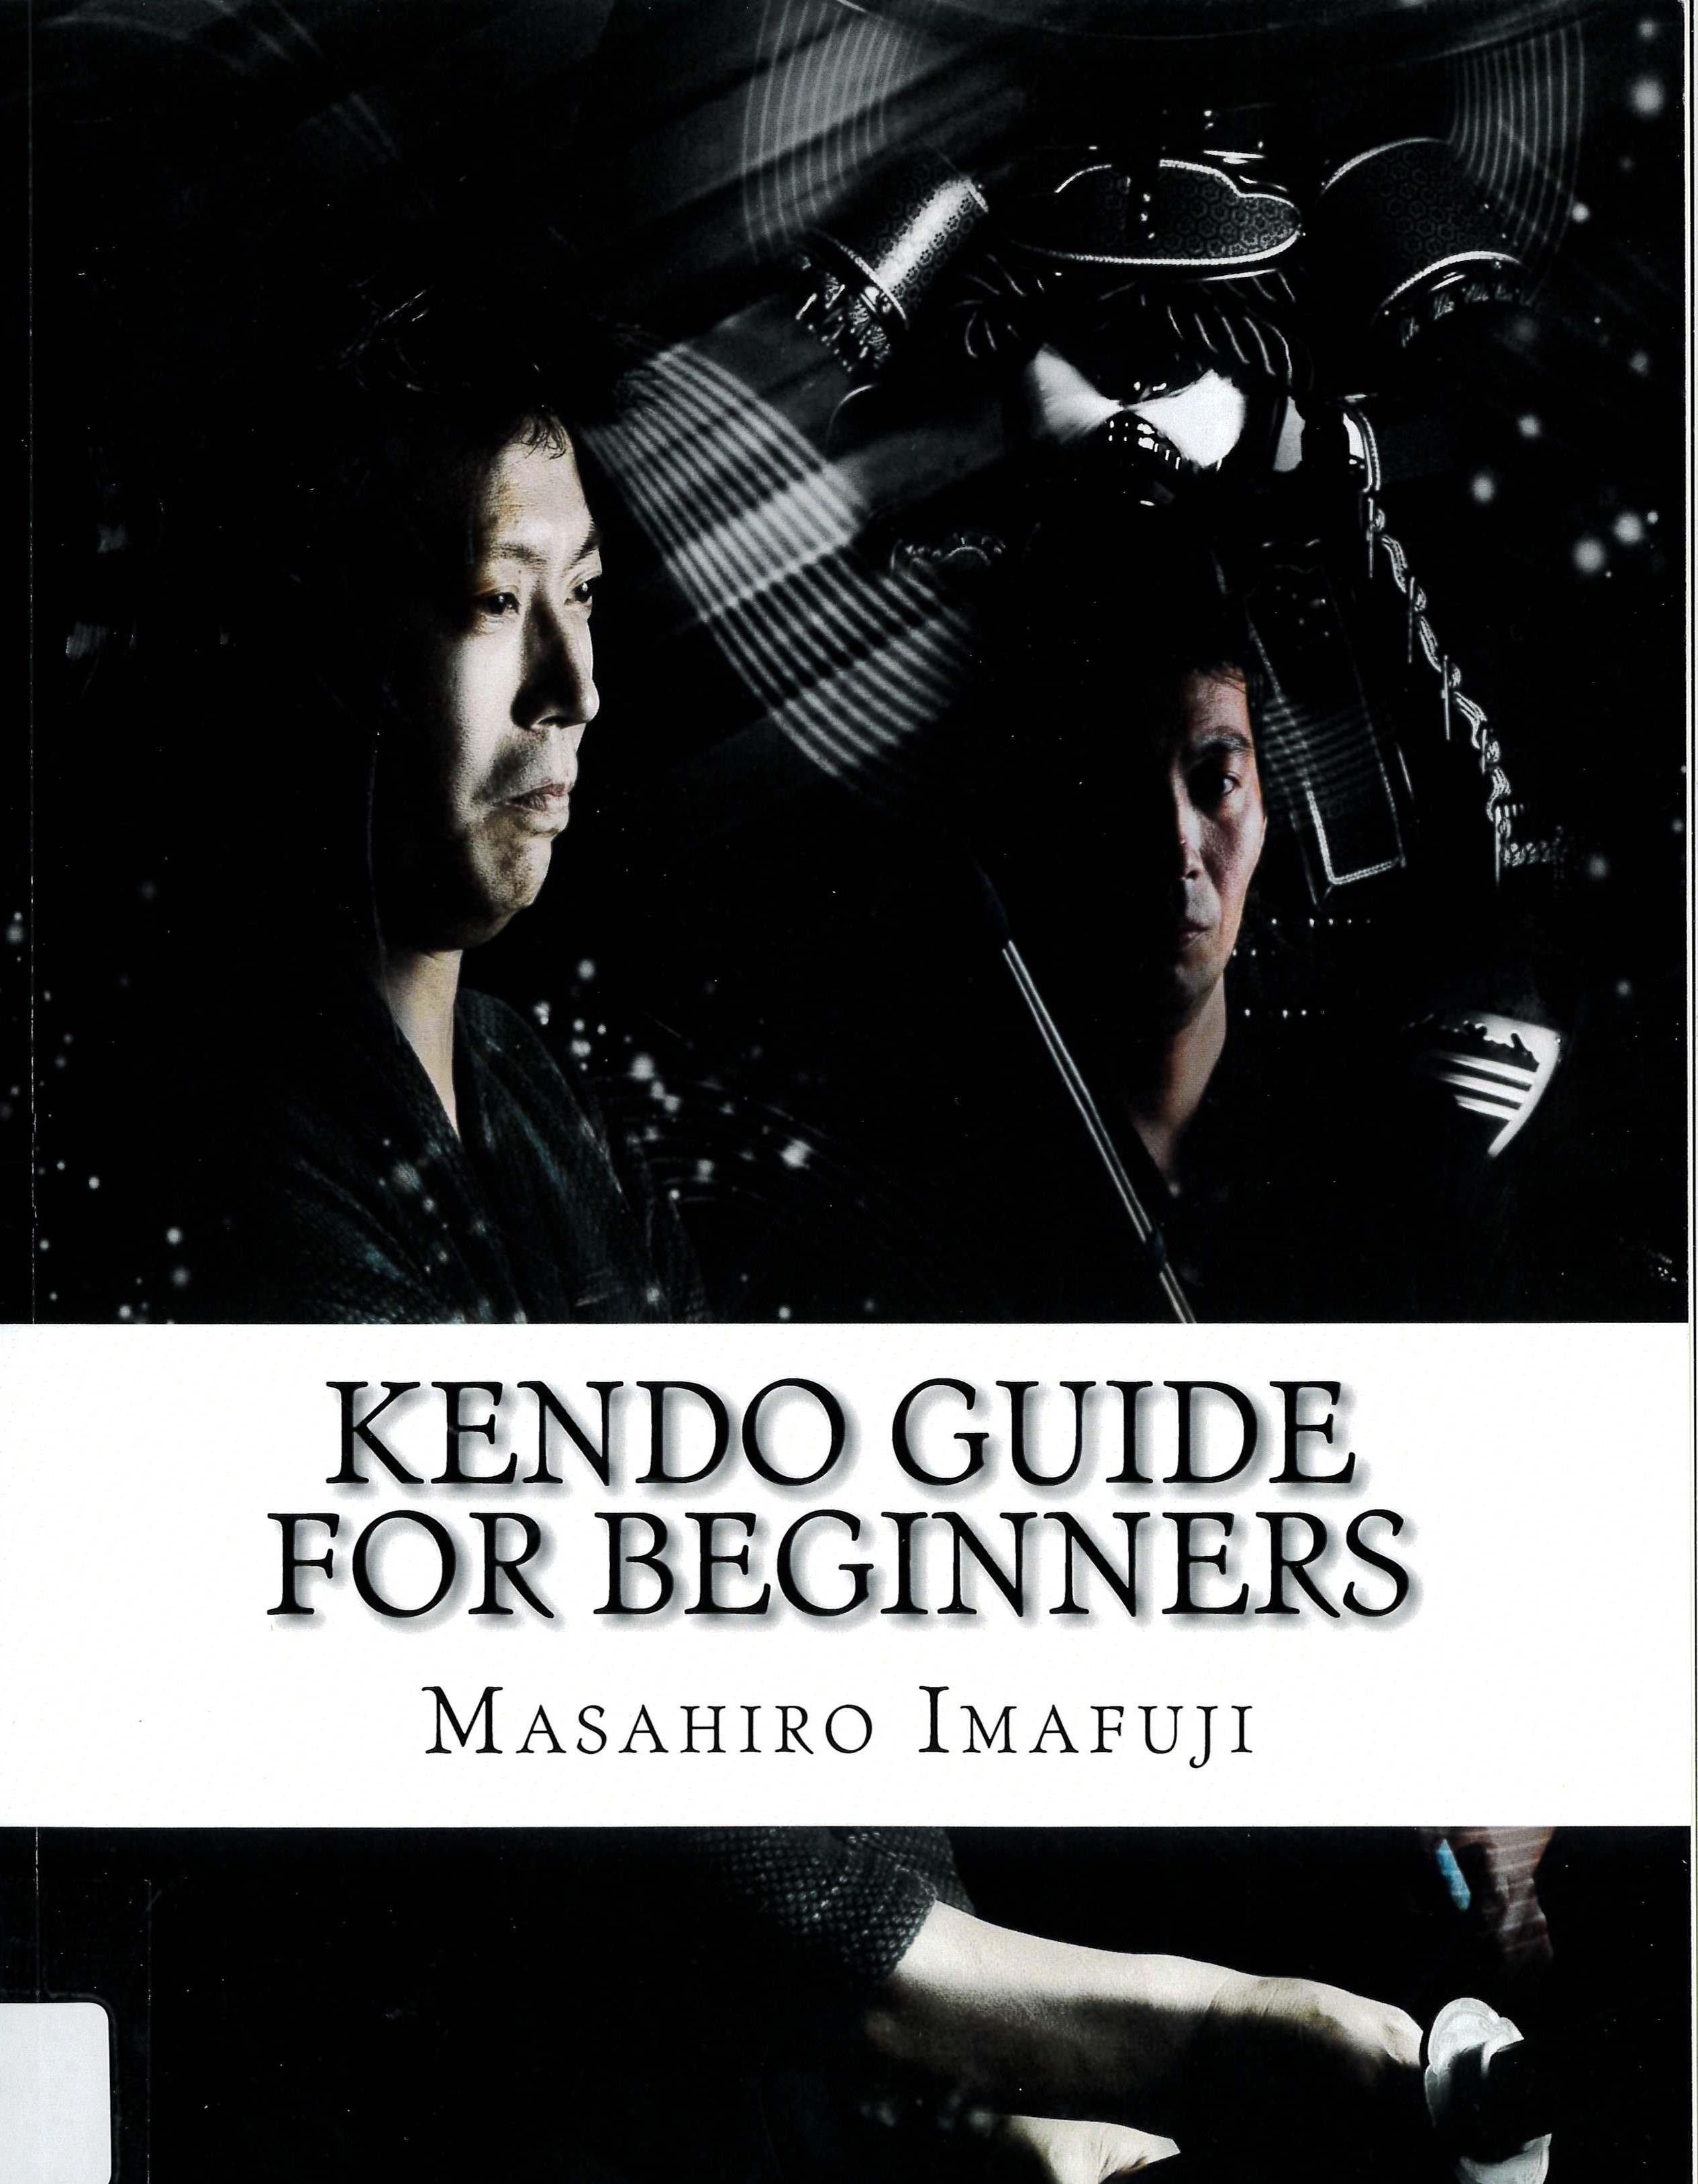 Kendo Guide for Beginners: A Kendo Instruction Book Written By A Japanese with More Than 25 Years of Experience Instructing Non-Japanese Kendo/